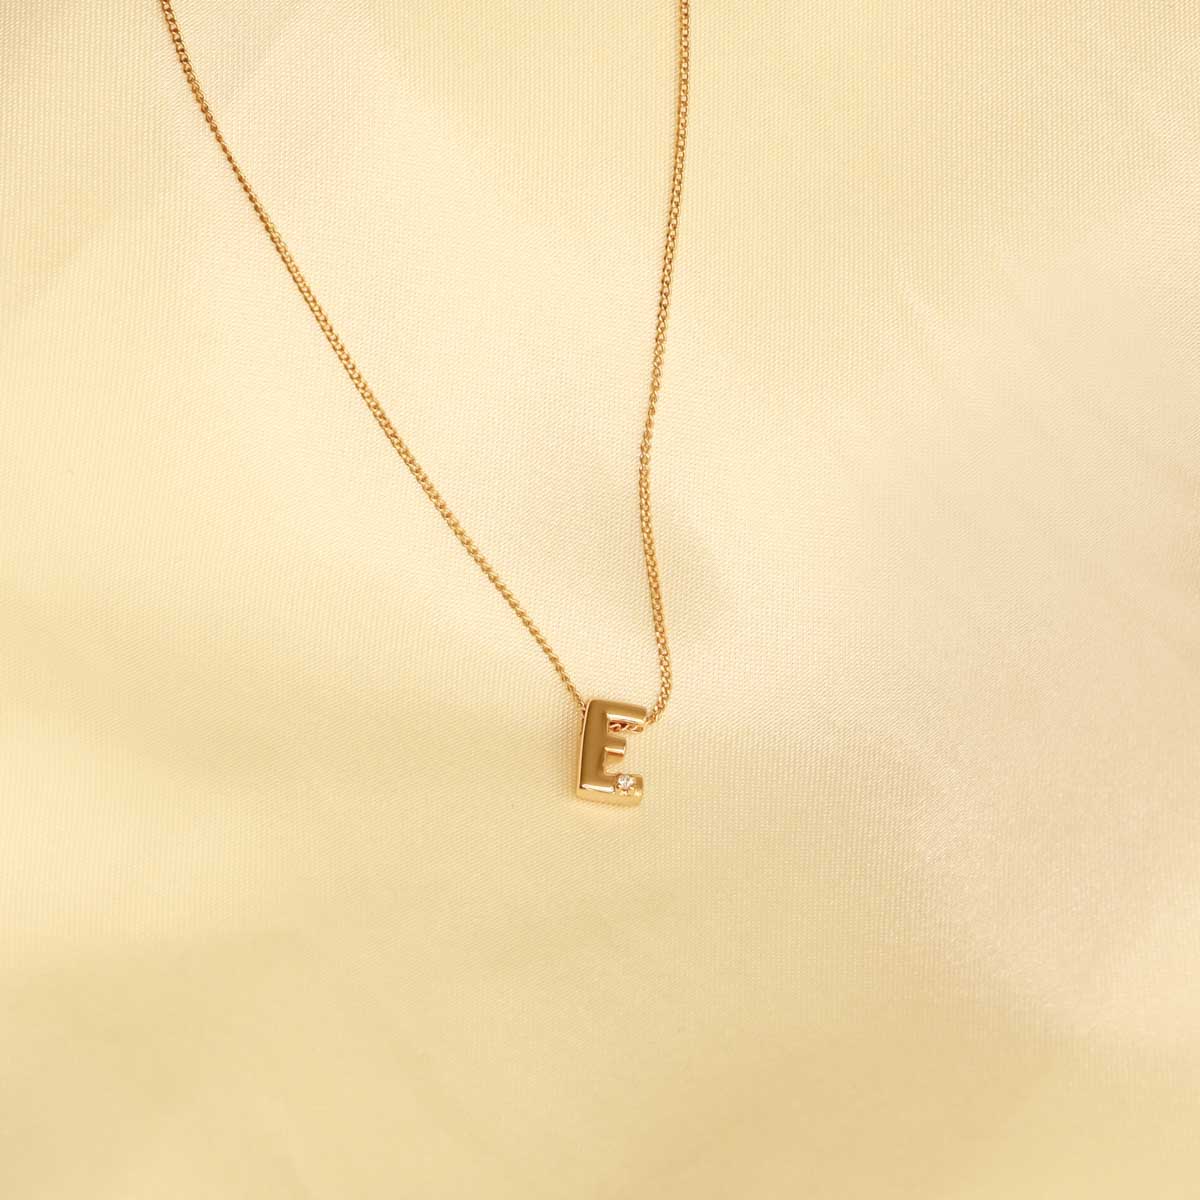 Flat lay shot of E Initial Pendant Necklace in Gold